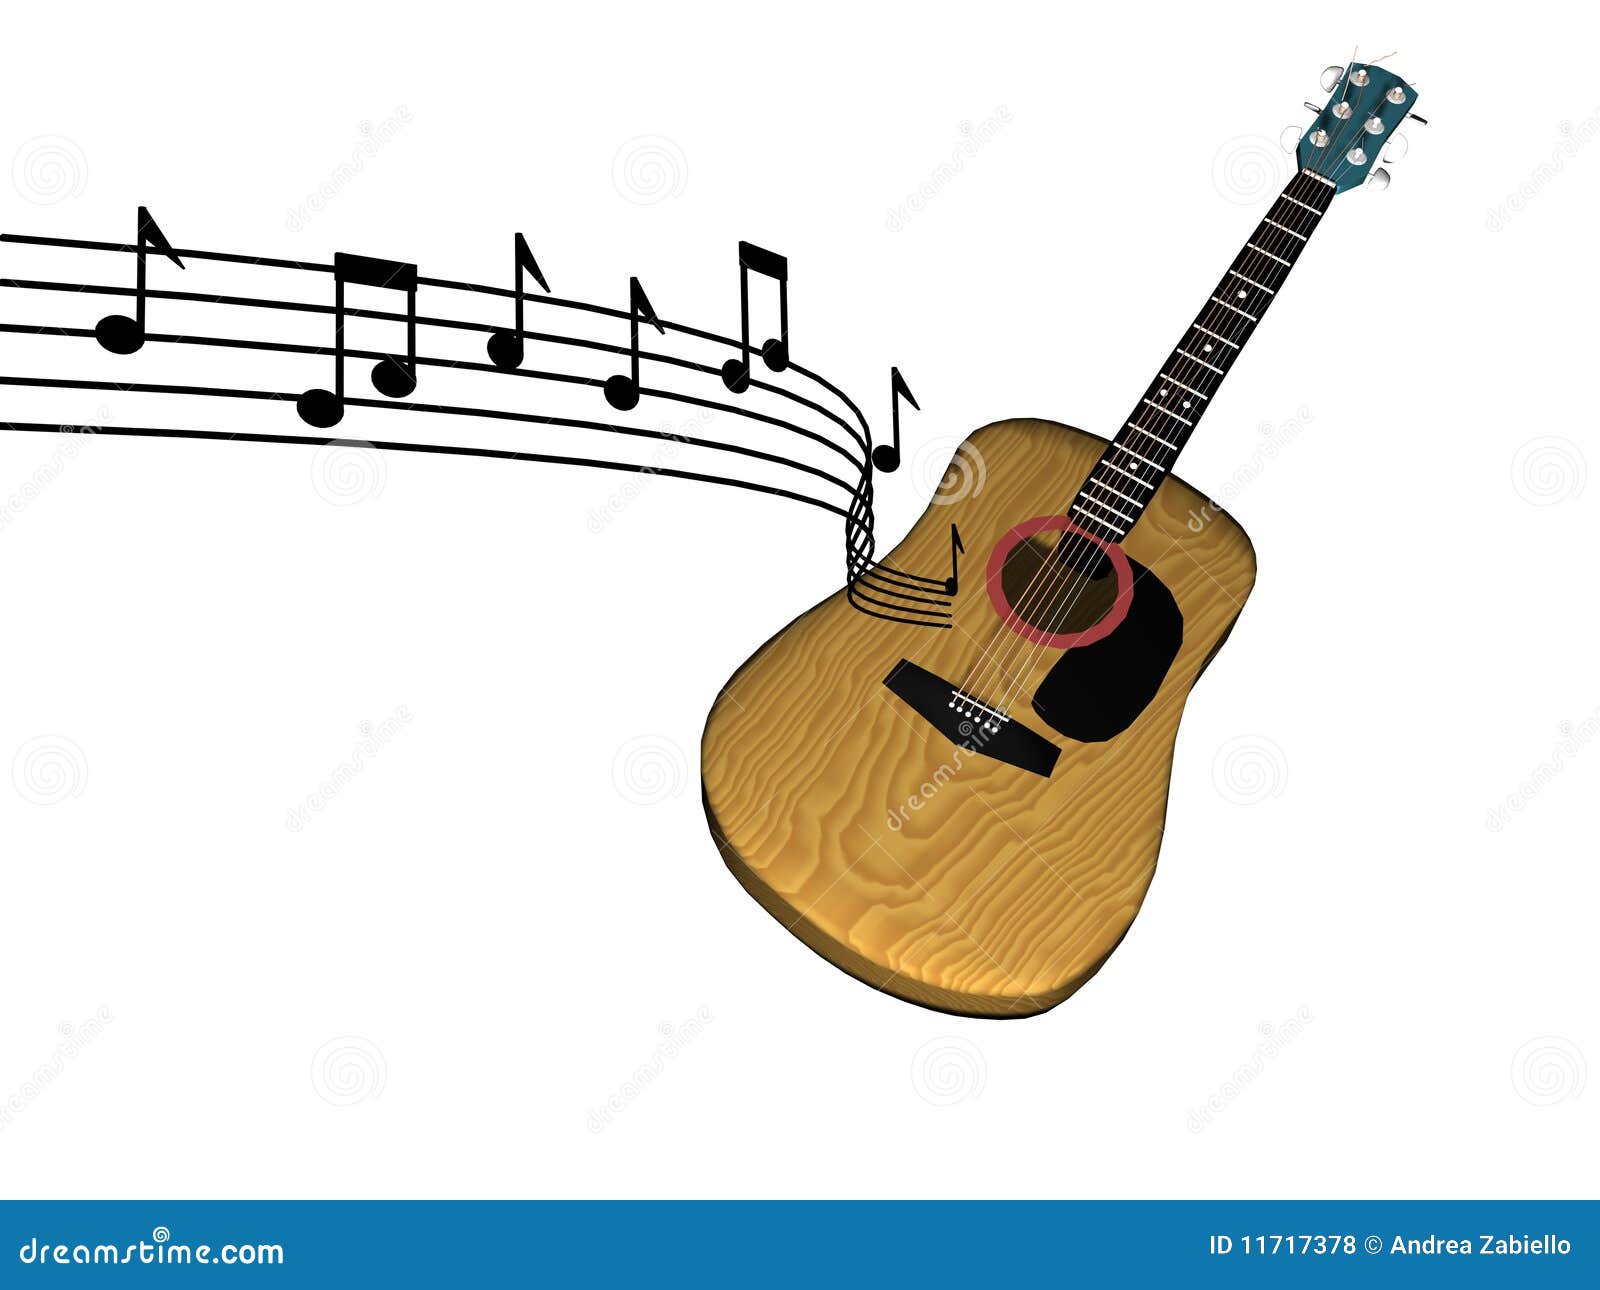 country music clipart graphics - photo #13